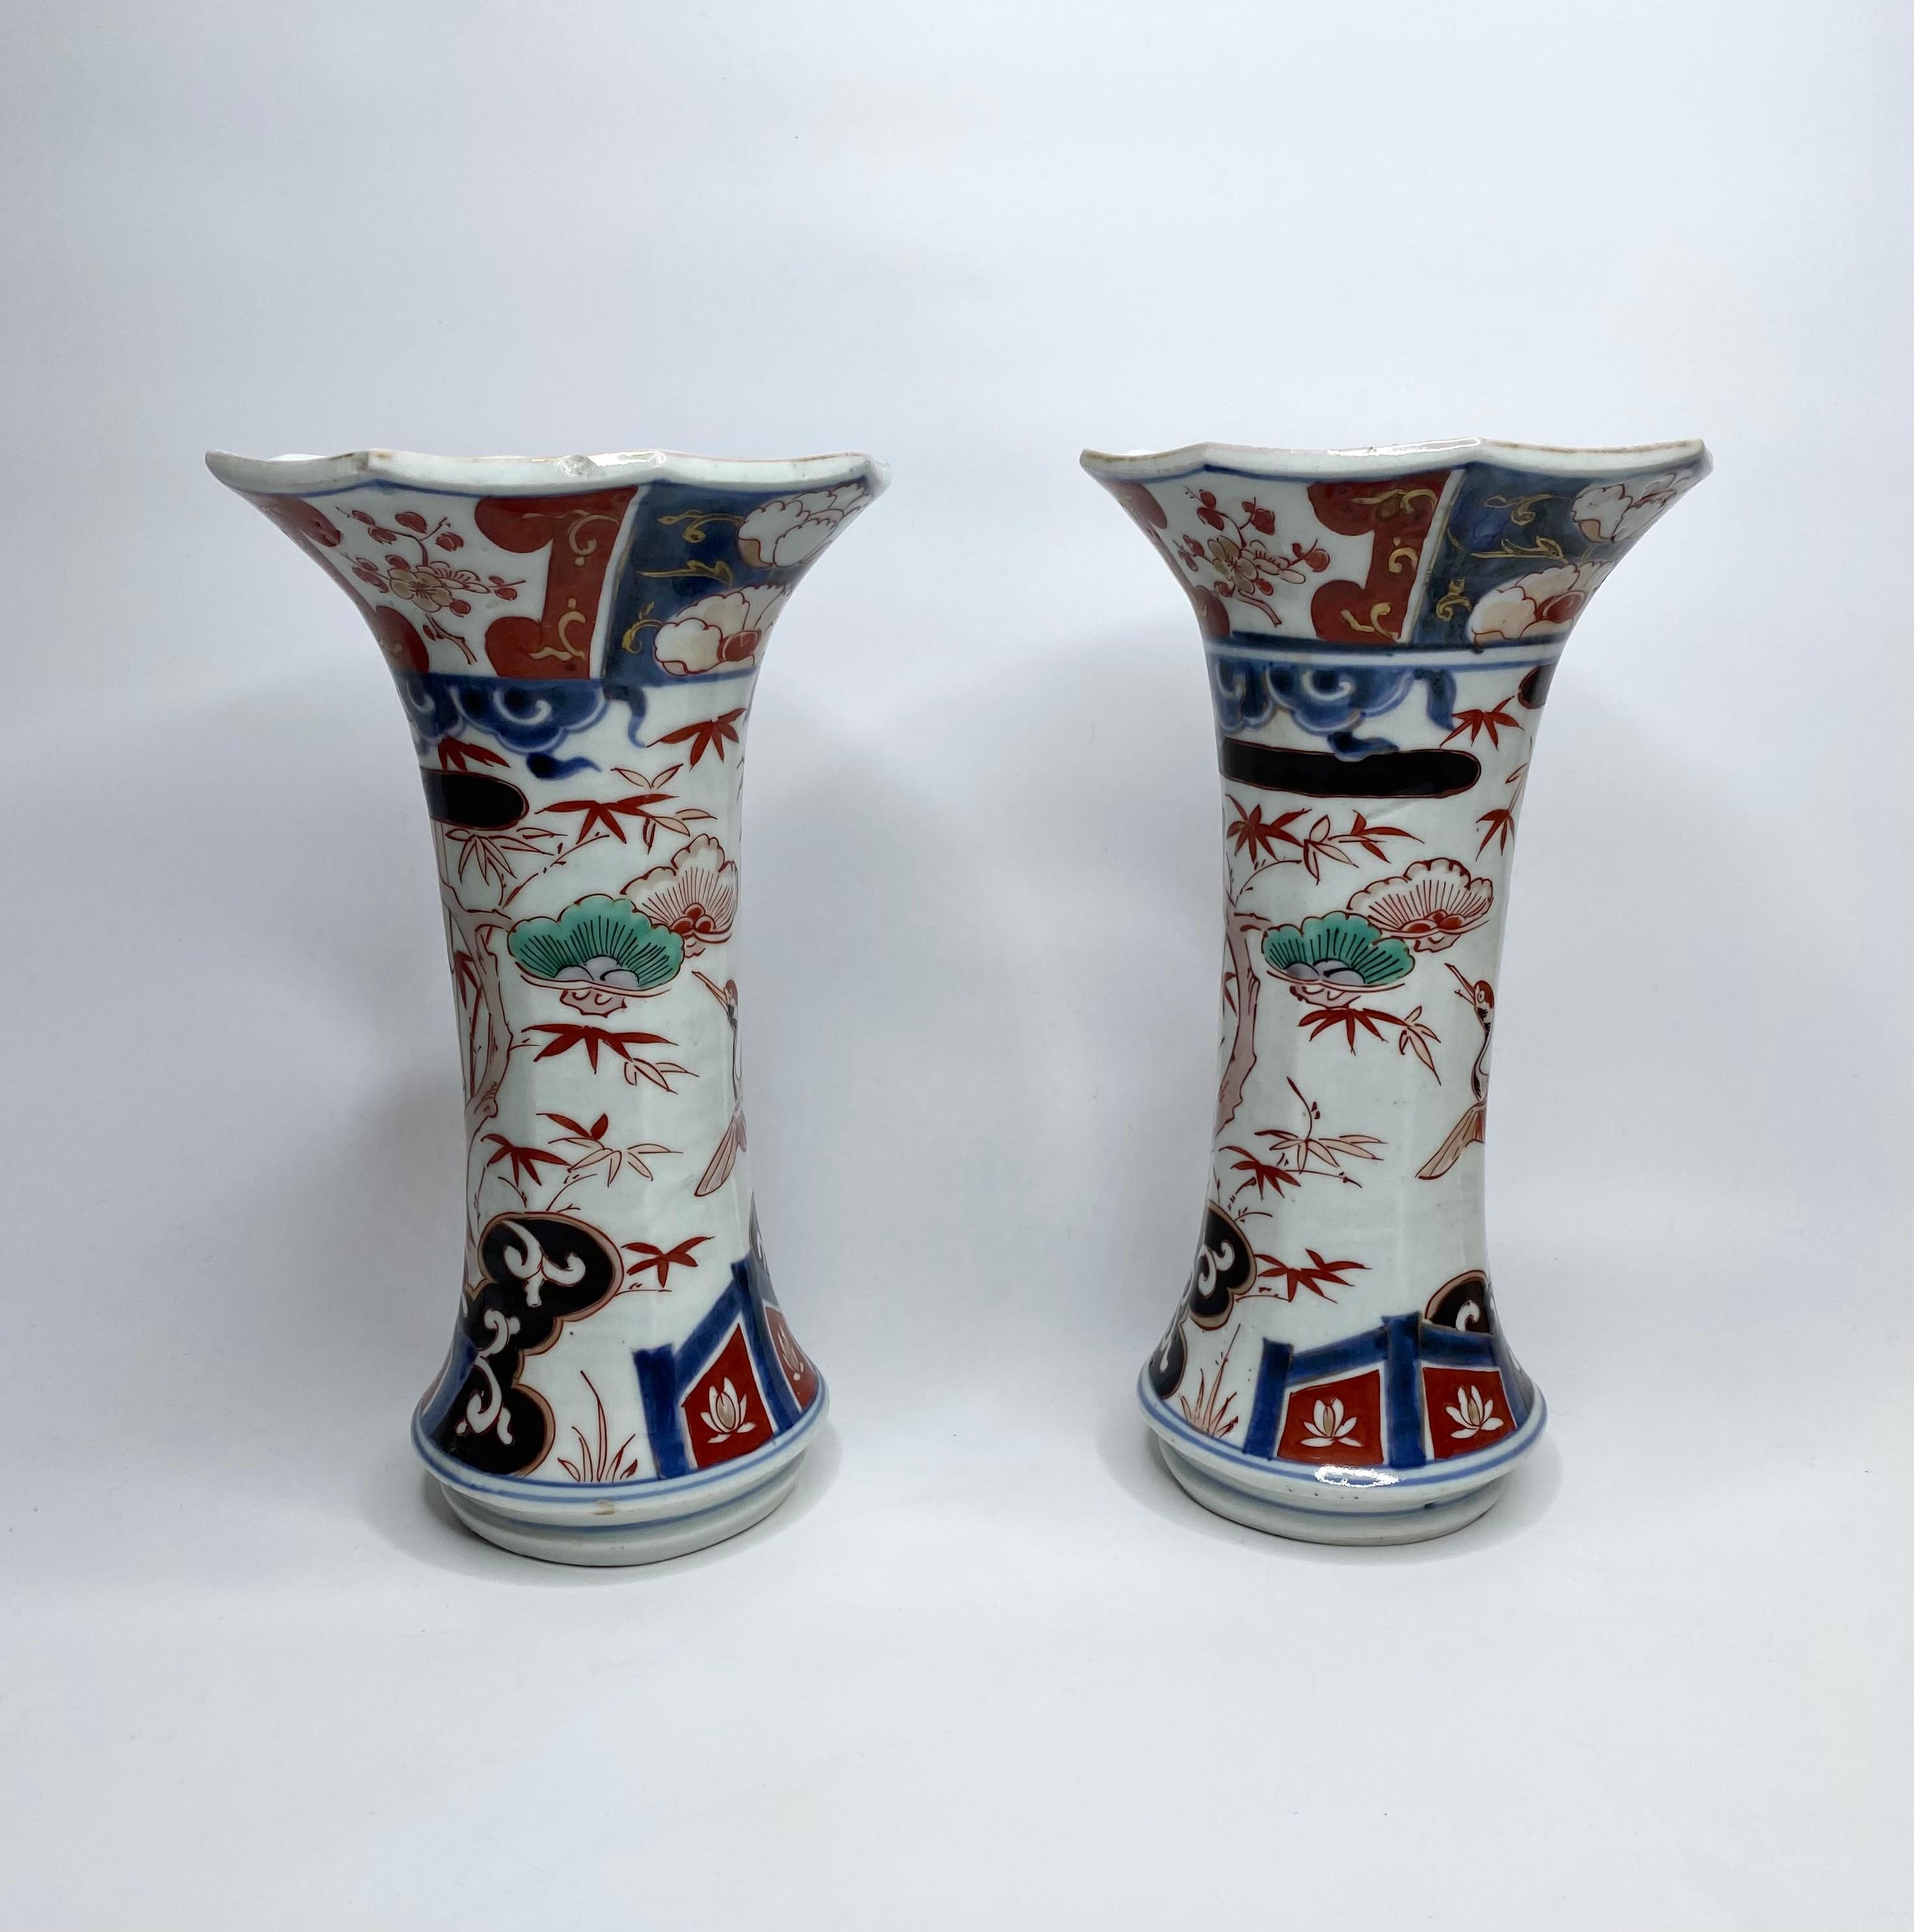 Pair of Japanese porcelain ‘Imari’ vases, Arita, c. 1700, Genryoku Period. The hexagonal shaped vases, hand painted in the Imari style, with storks flying amongst flowering prunus trees and bamboo plants, beneath clouds. The rim, painted with panels